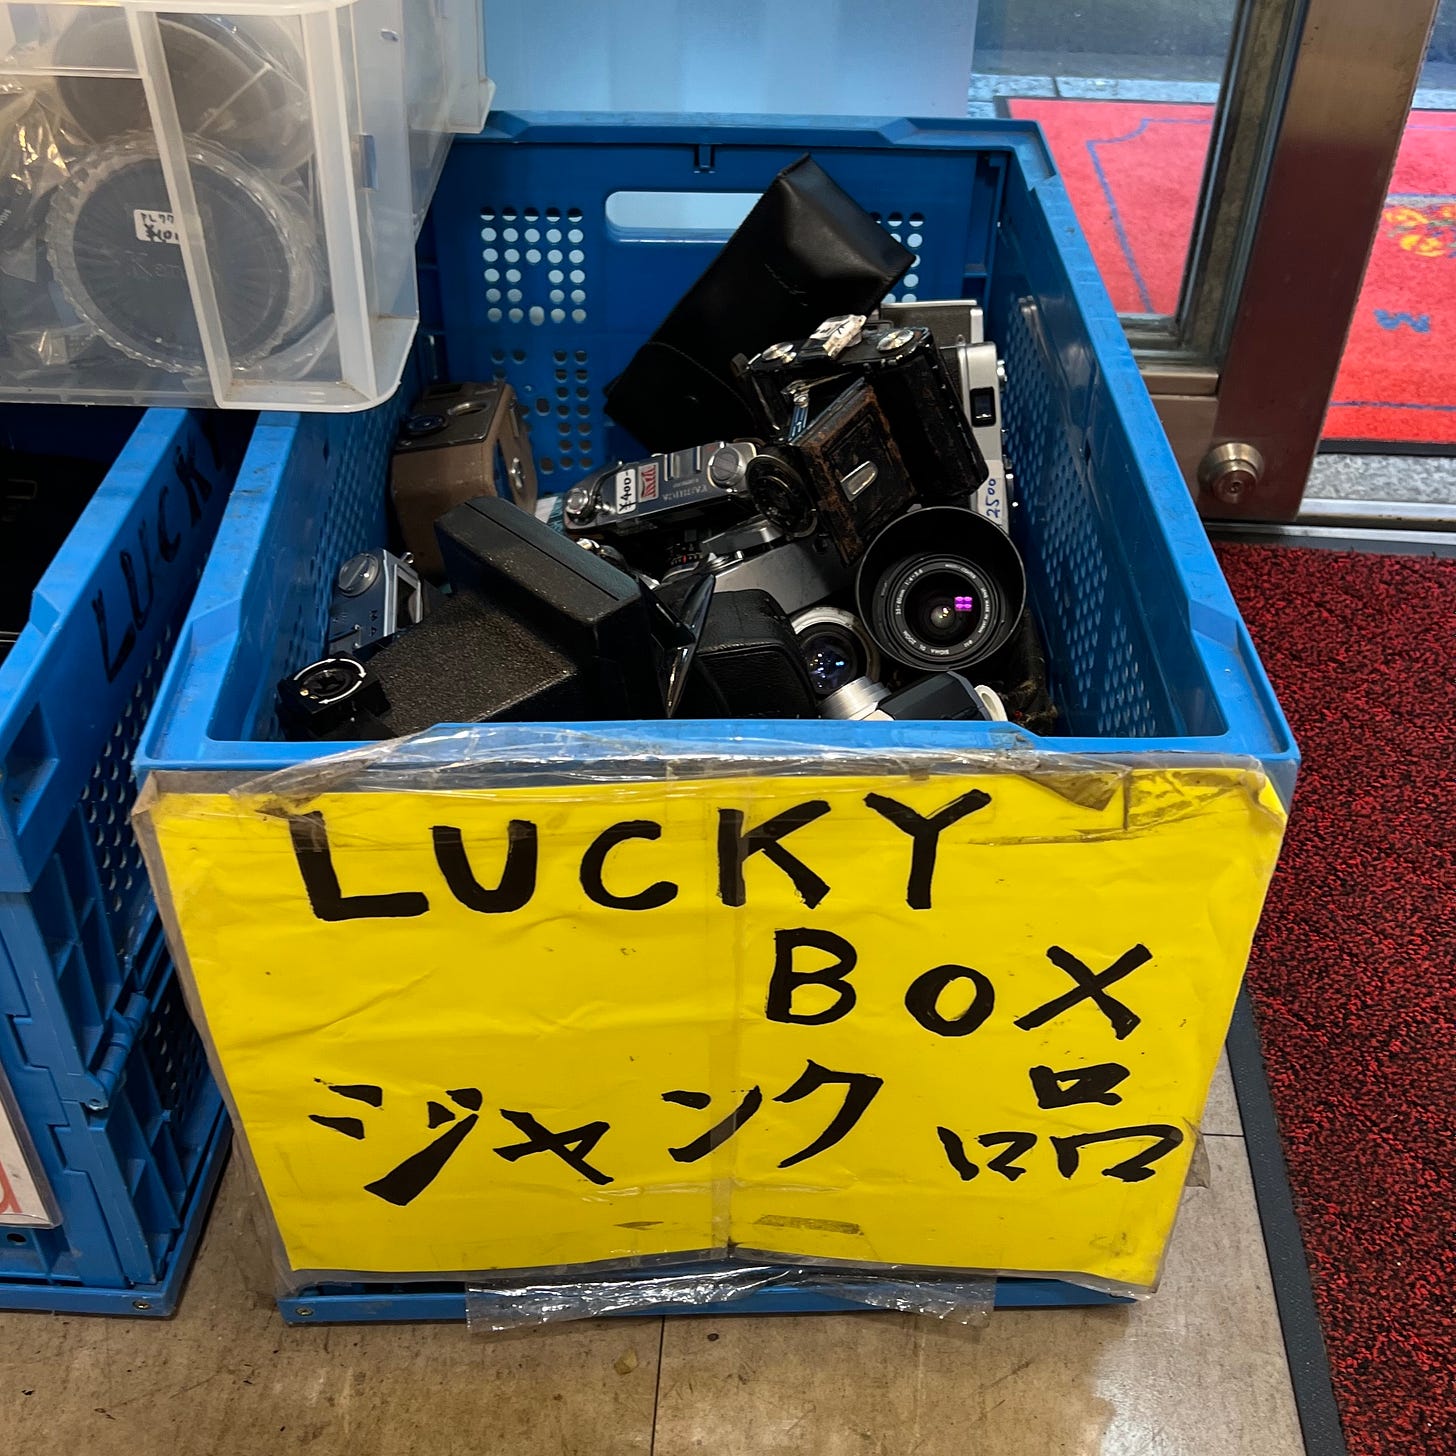 Blue plastic crate full of vintage cameras with bright yellow sign reading in English "LUCKY BOX", and in Japanese "Junk"